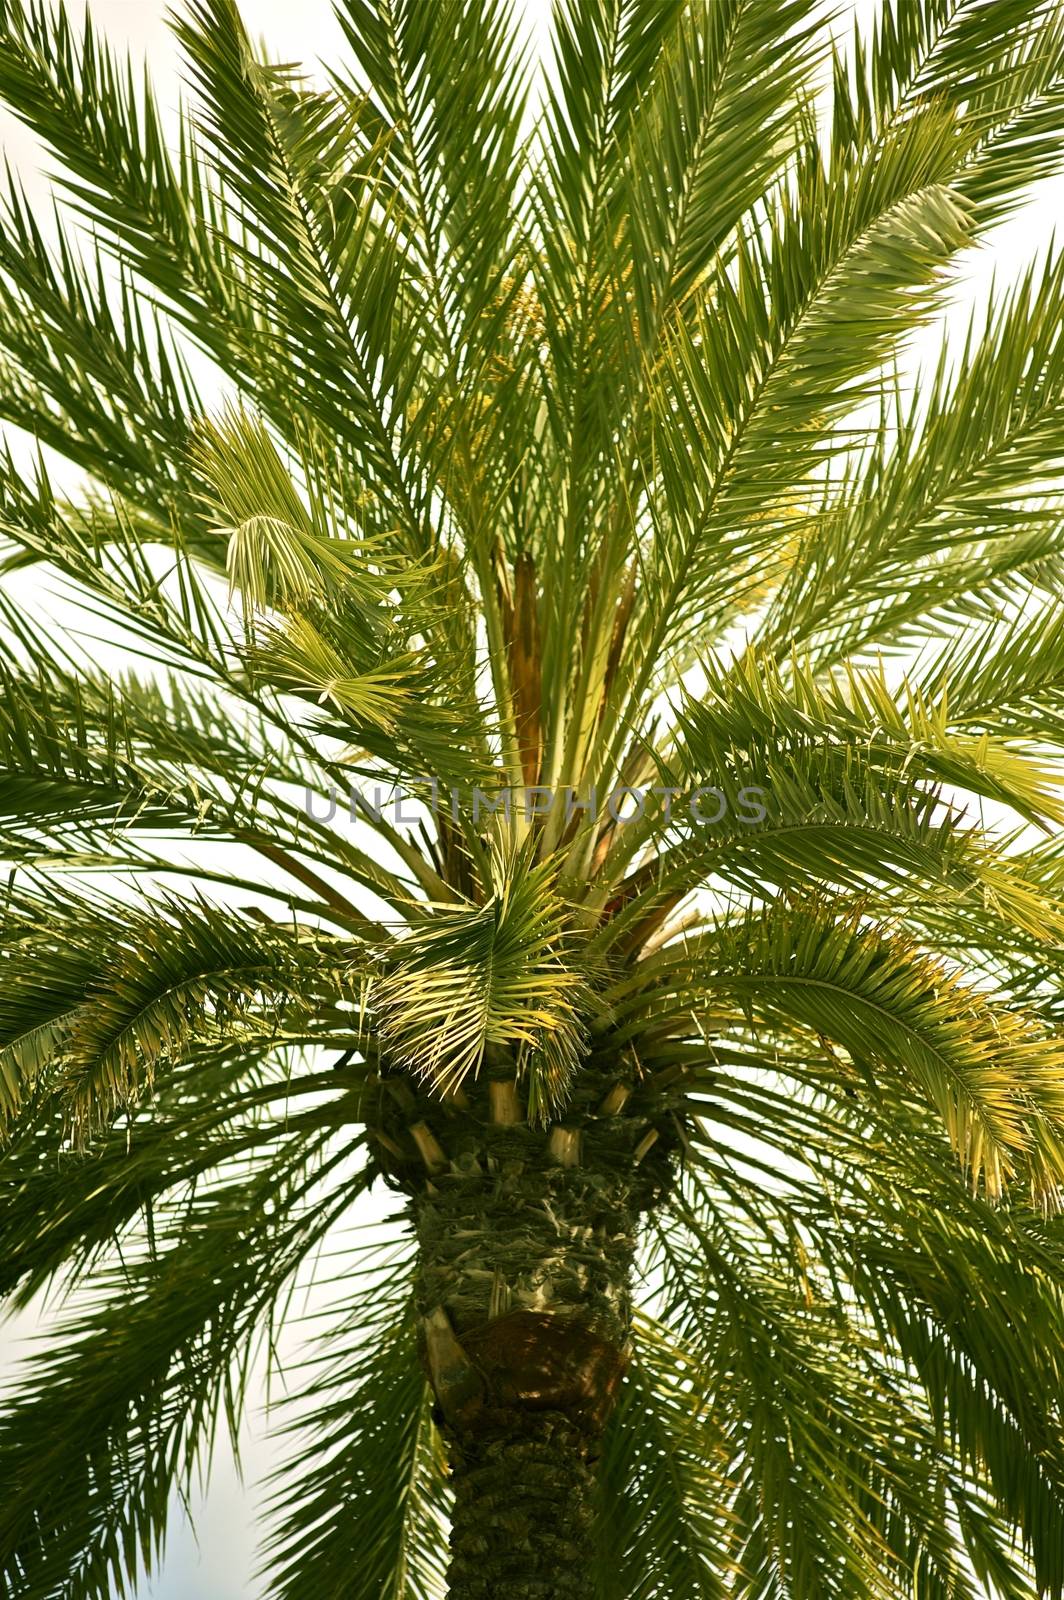 Canary Palm Tree - California Nature. Palm Tree Background. Vertical Photo